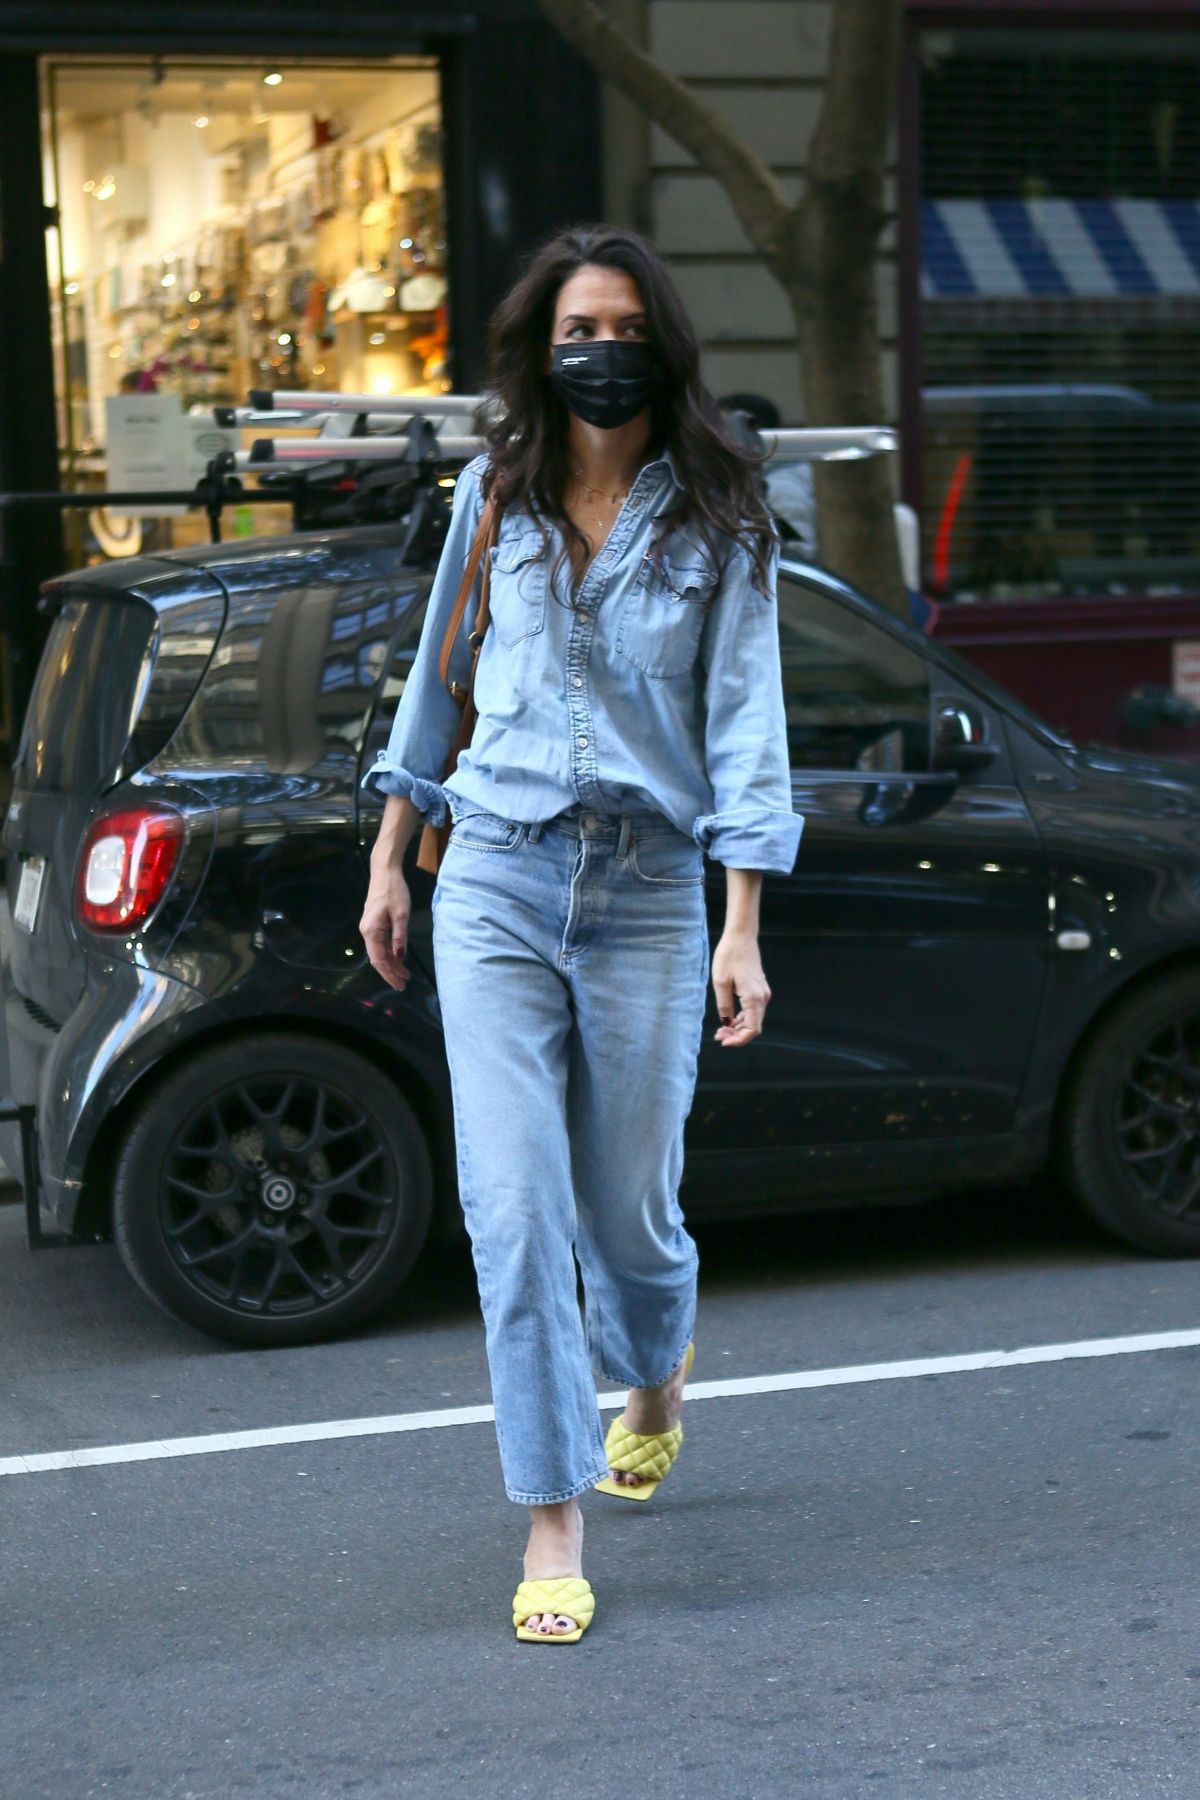 katie-holmes-in-double-denim-out-in-new-york-11-10-2020-7.jpg